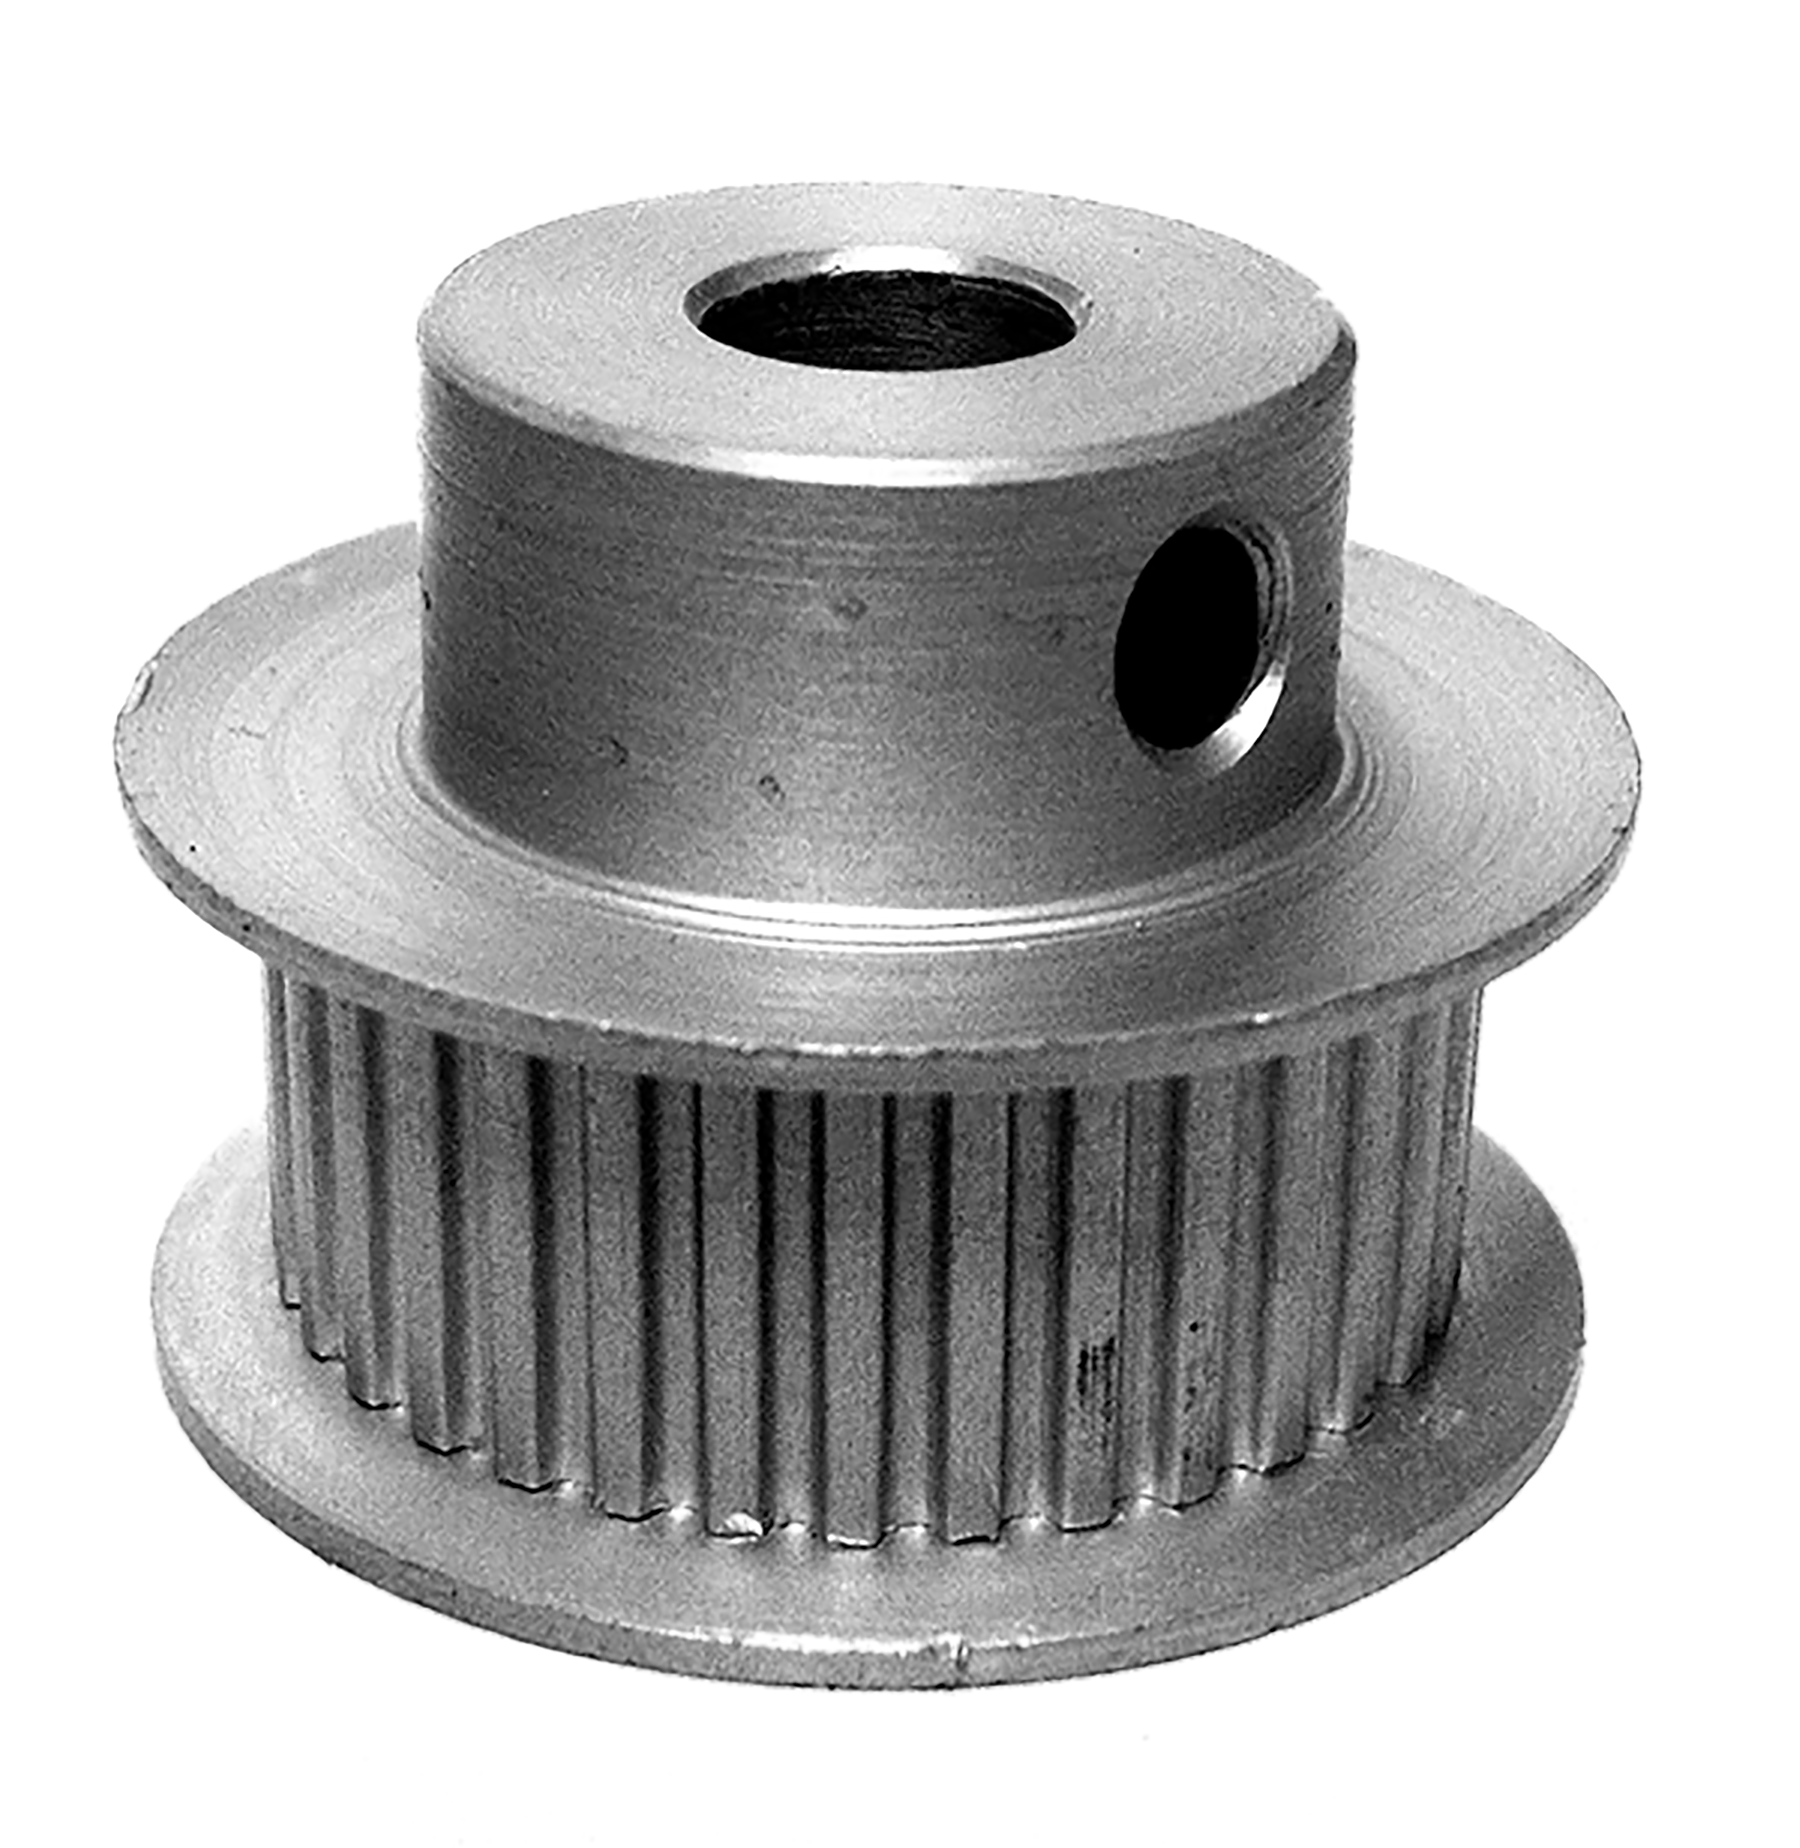 33LT312-6FA3 - Aluminum Imperial Pitch Pulleys